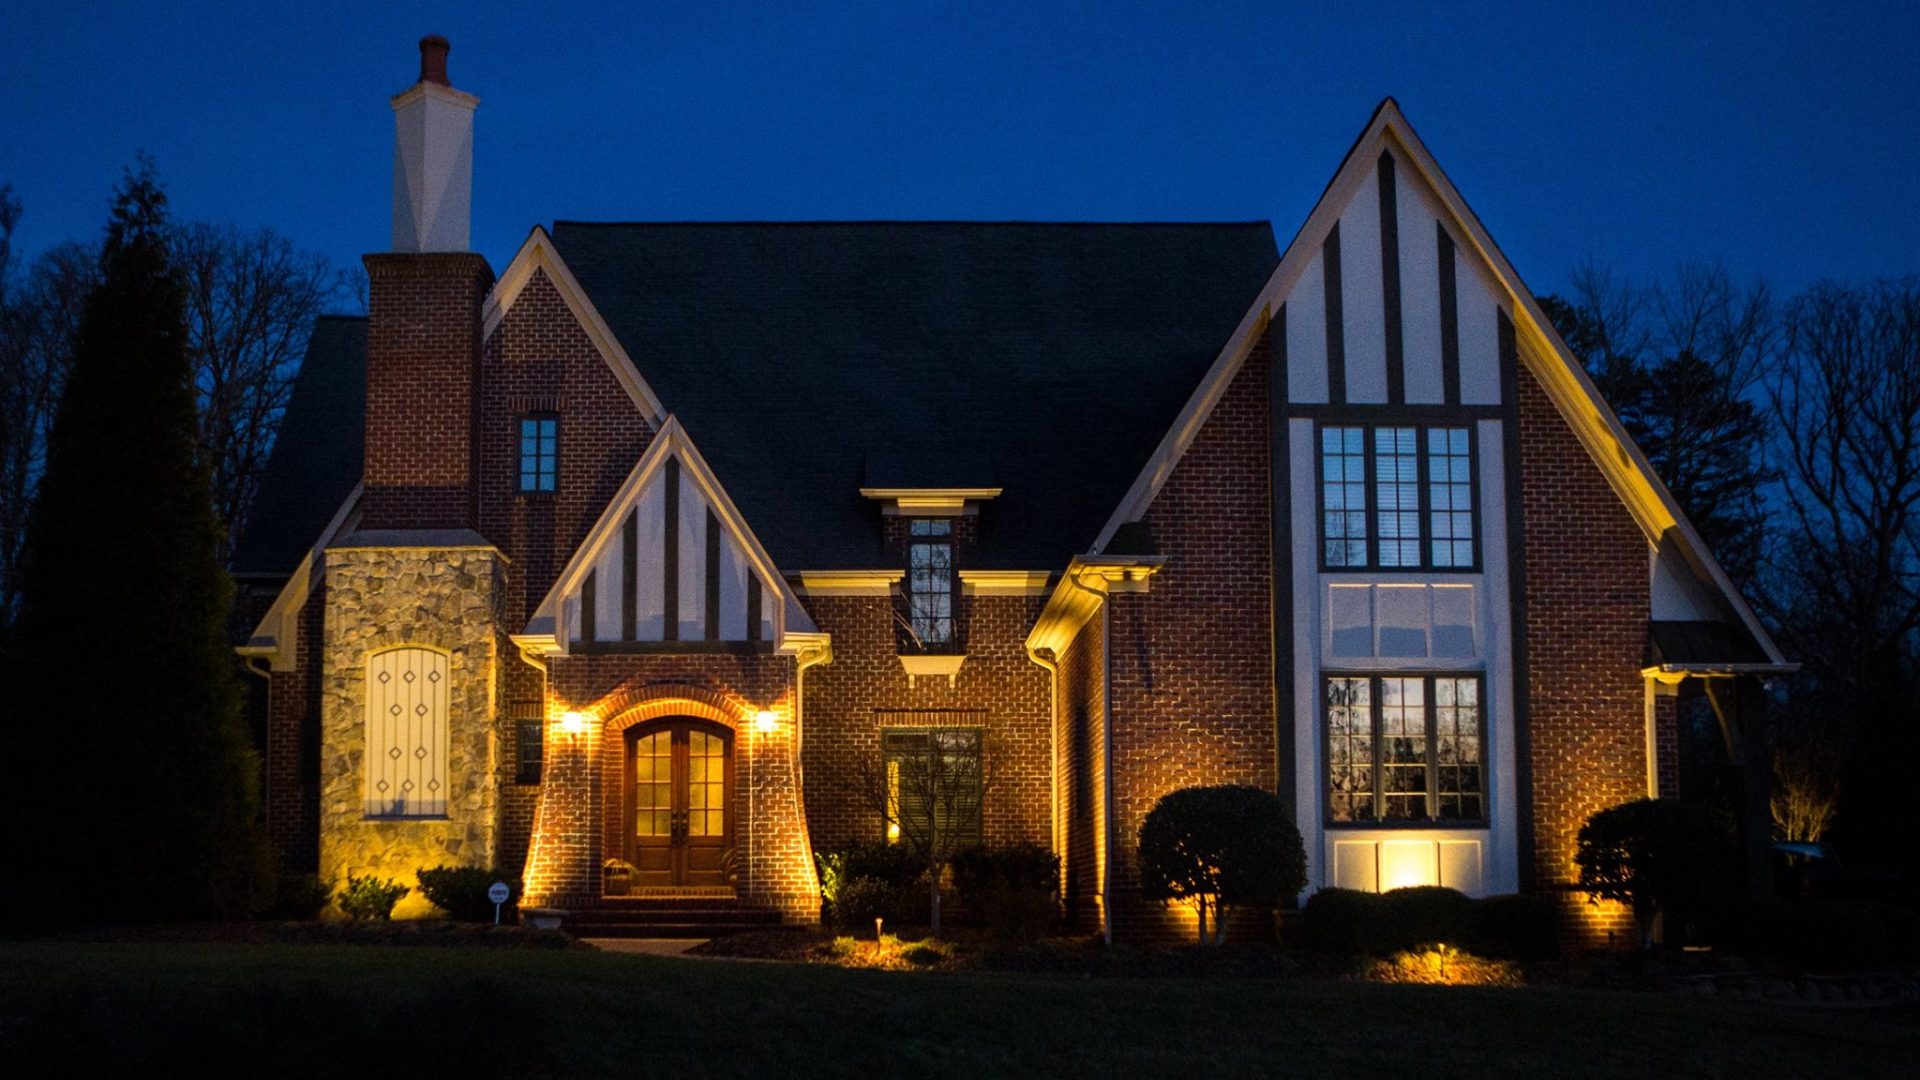 A beautiful home with outdoor lighting around the home in Greensboro, NC.